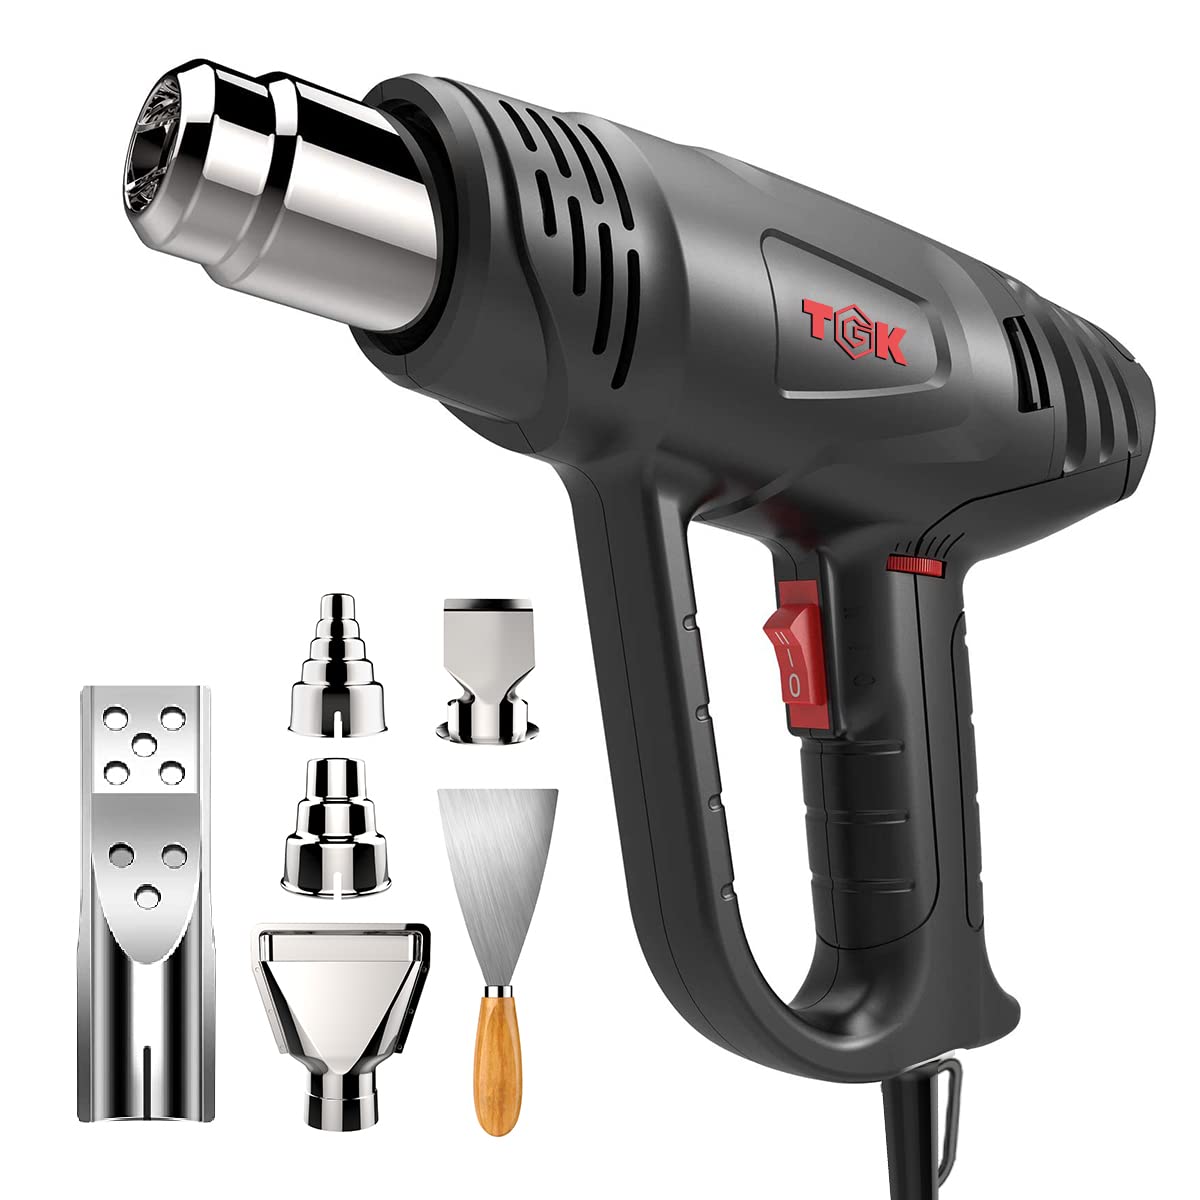 Short Lead Time for Heat Gun To Remove Rusted Bolts - Heat Gun, TGK 1800W Heavy Duty Hot Air Gun Kit 122℉~1202℉ Dual Temperature Settings with 6 Nozzle Attachments Overload Protection for Crafts, ...